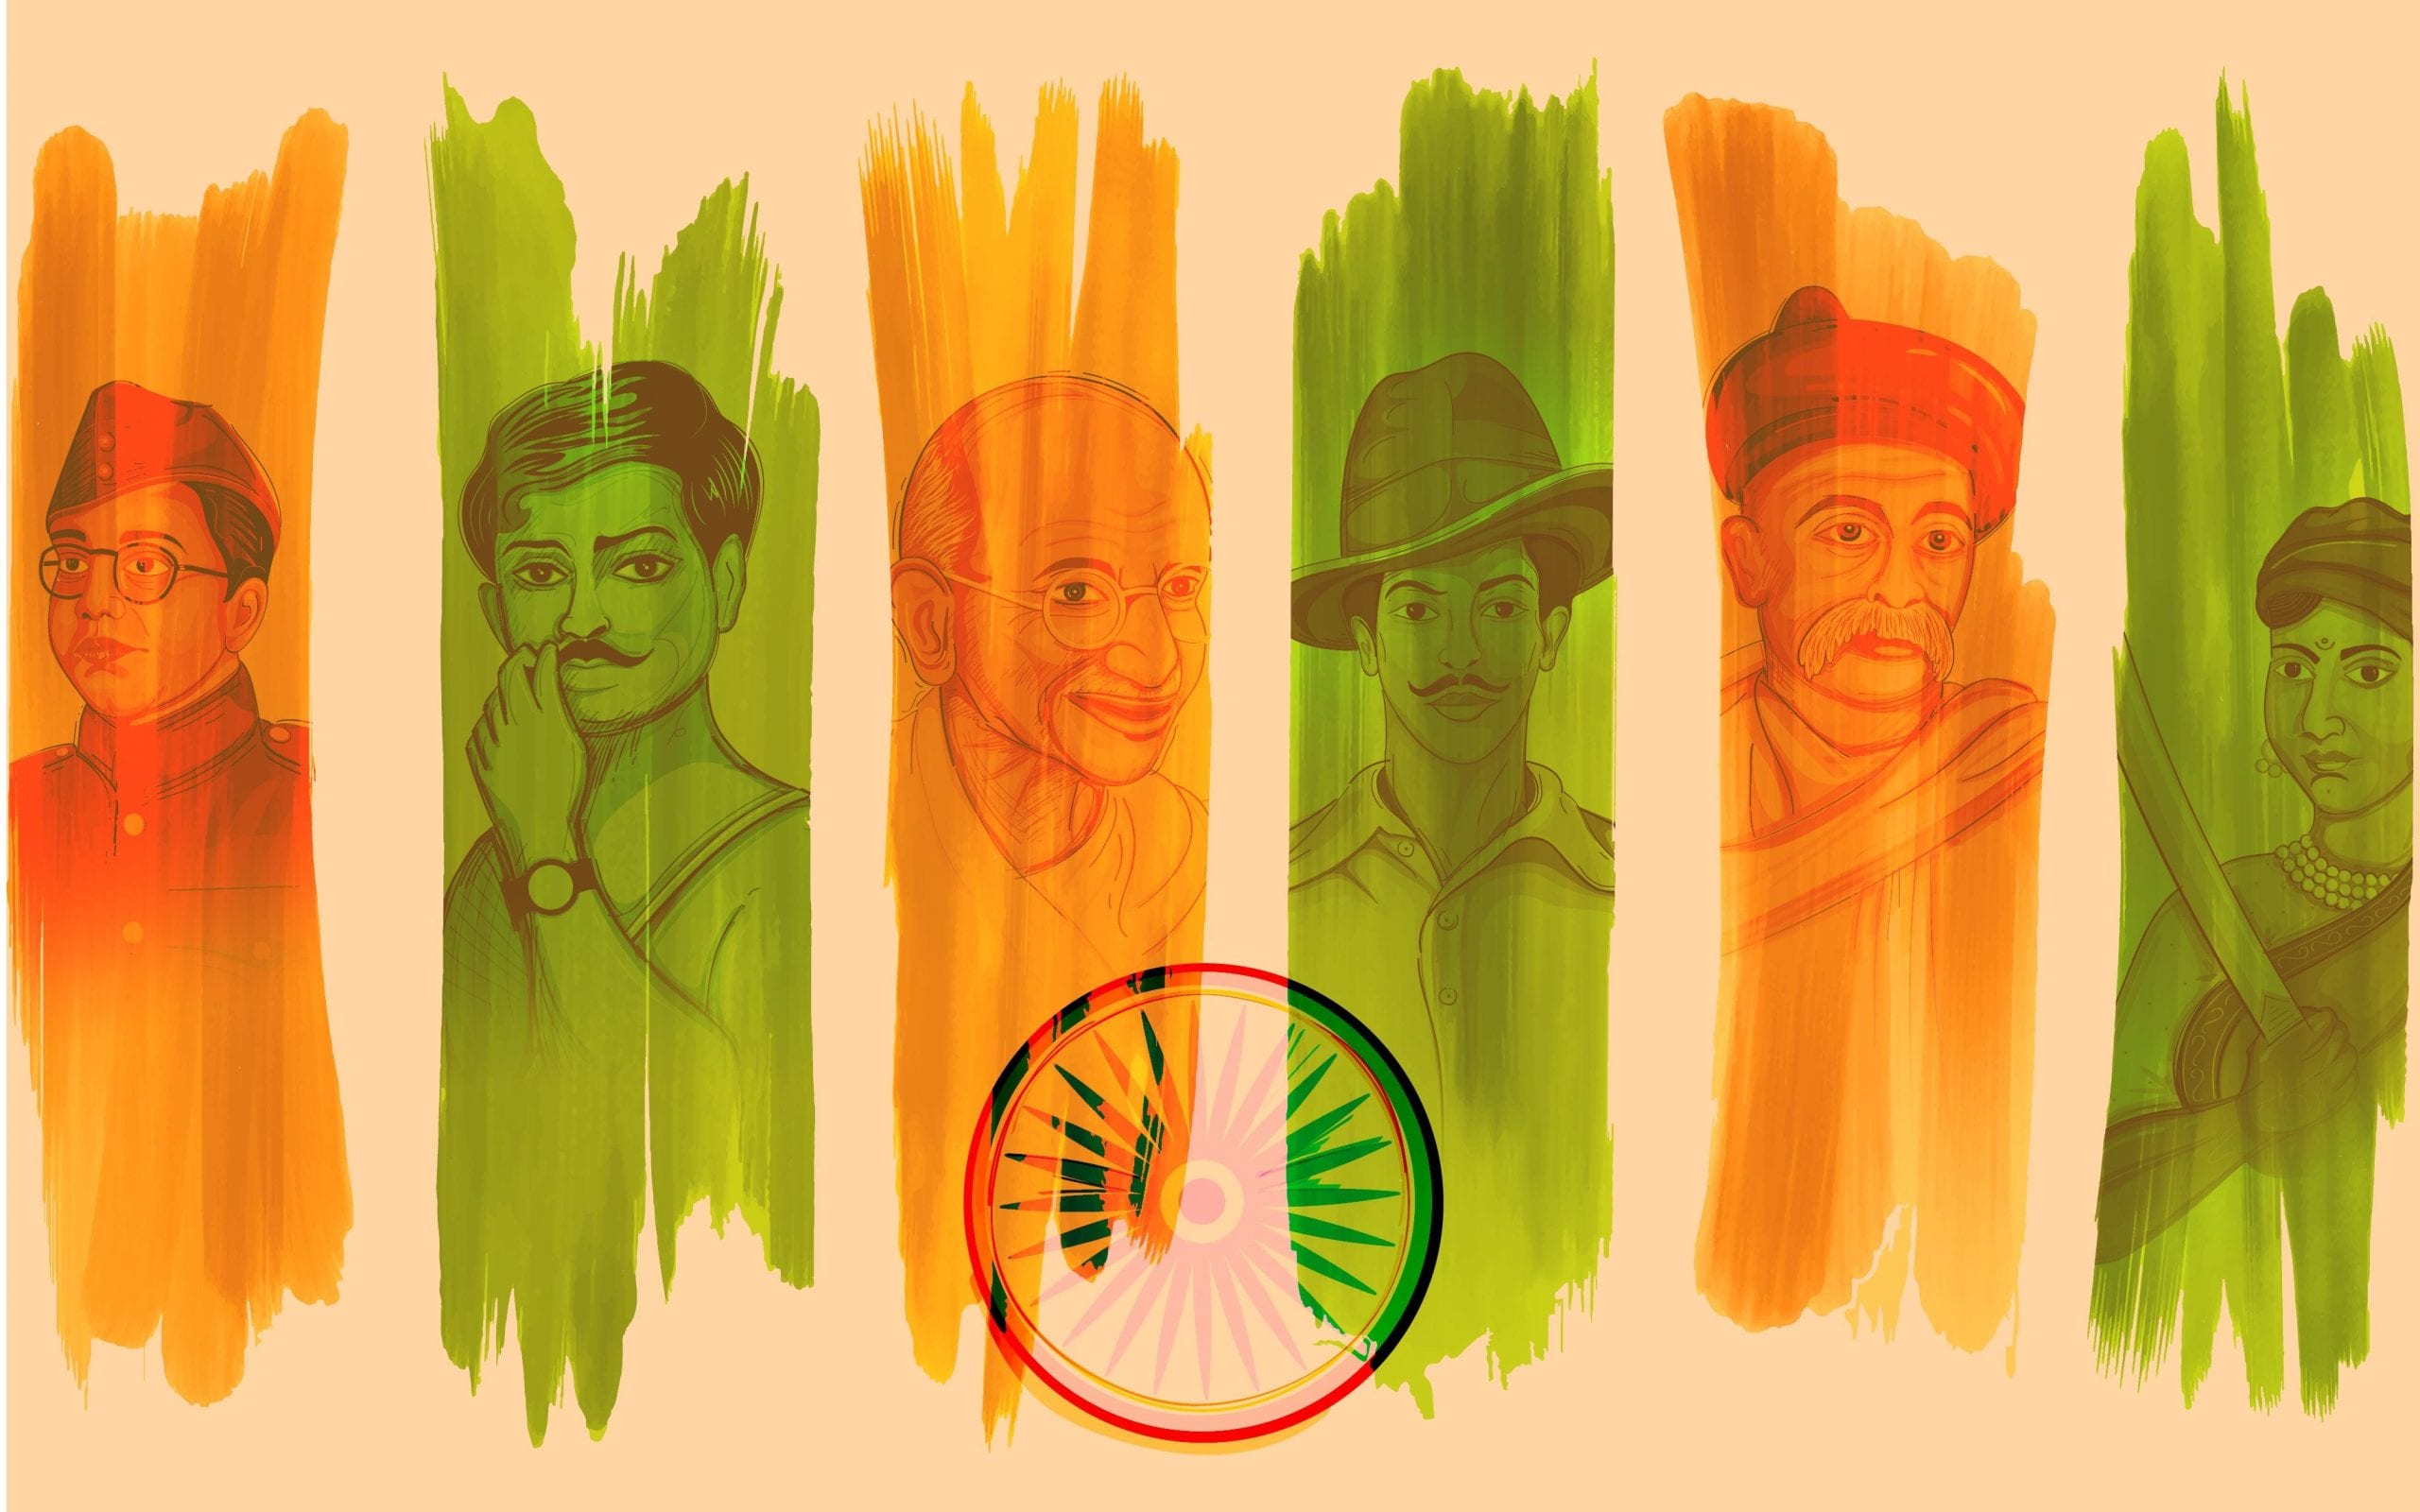 Freedom Fighters Of India Wallpapers - Wallpaper Cave